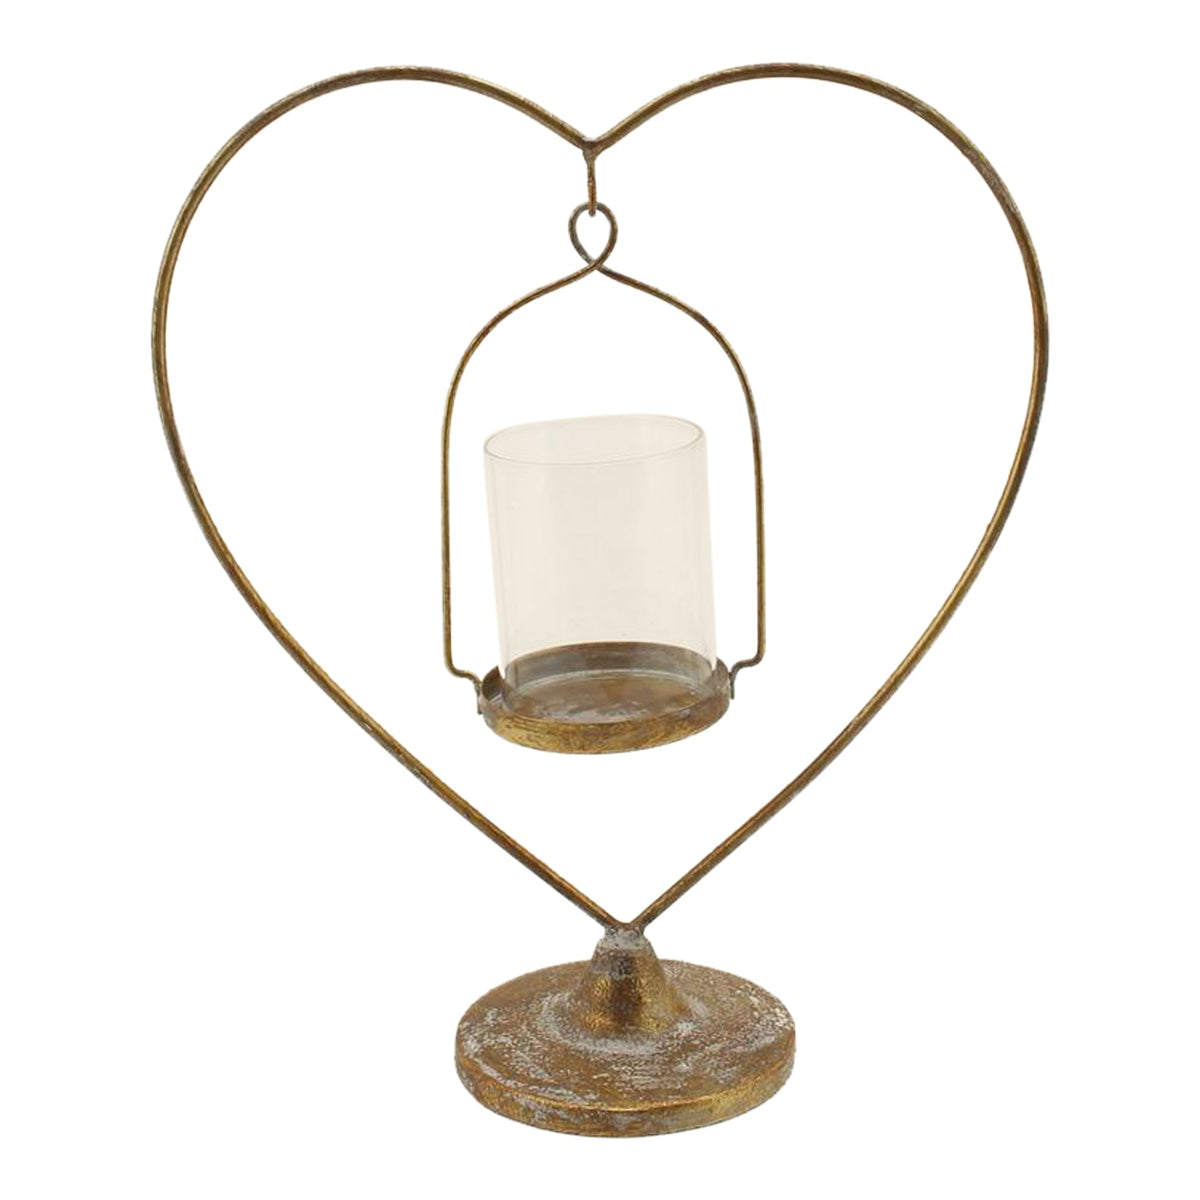 Floating Heart Tealight Iron Candle Holder - Antique Gold - Notbrand